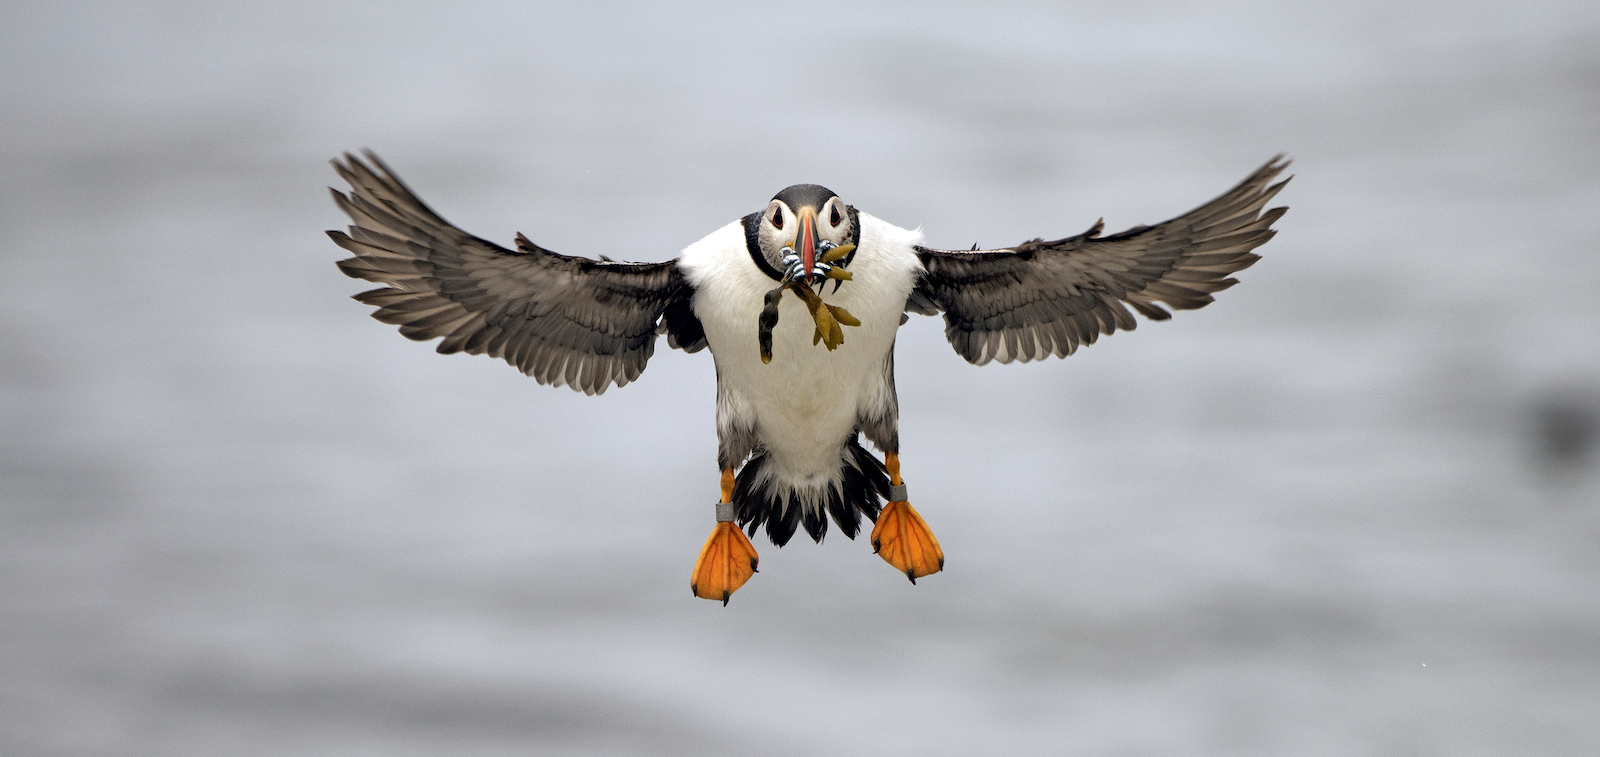 We saved the puffins. Now a warming planet is unraveling that work